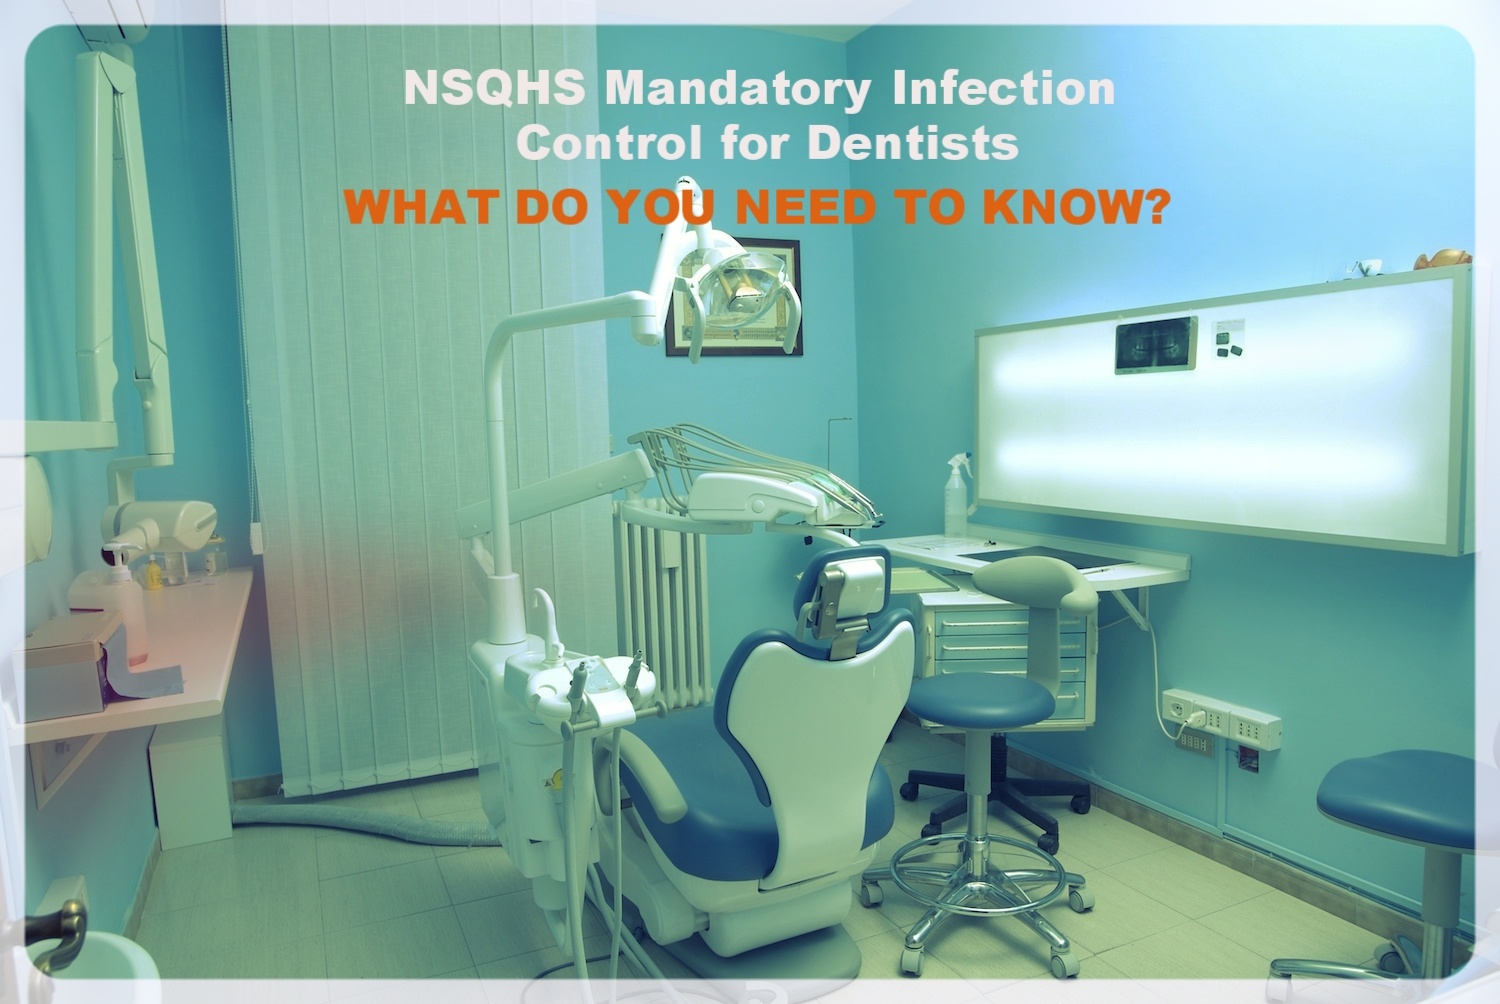 NSQHS Mandatory Compliance for Dental Infection control systems